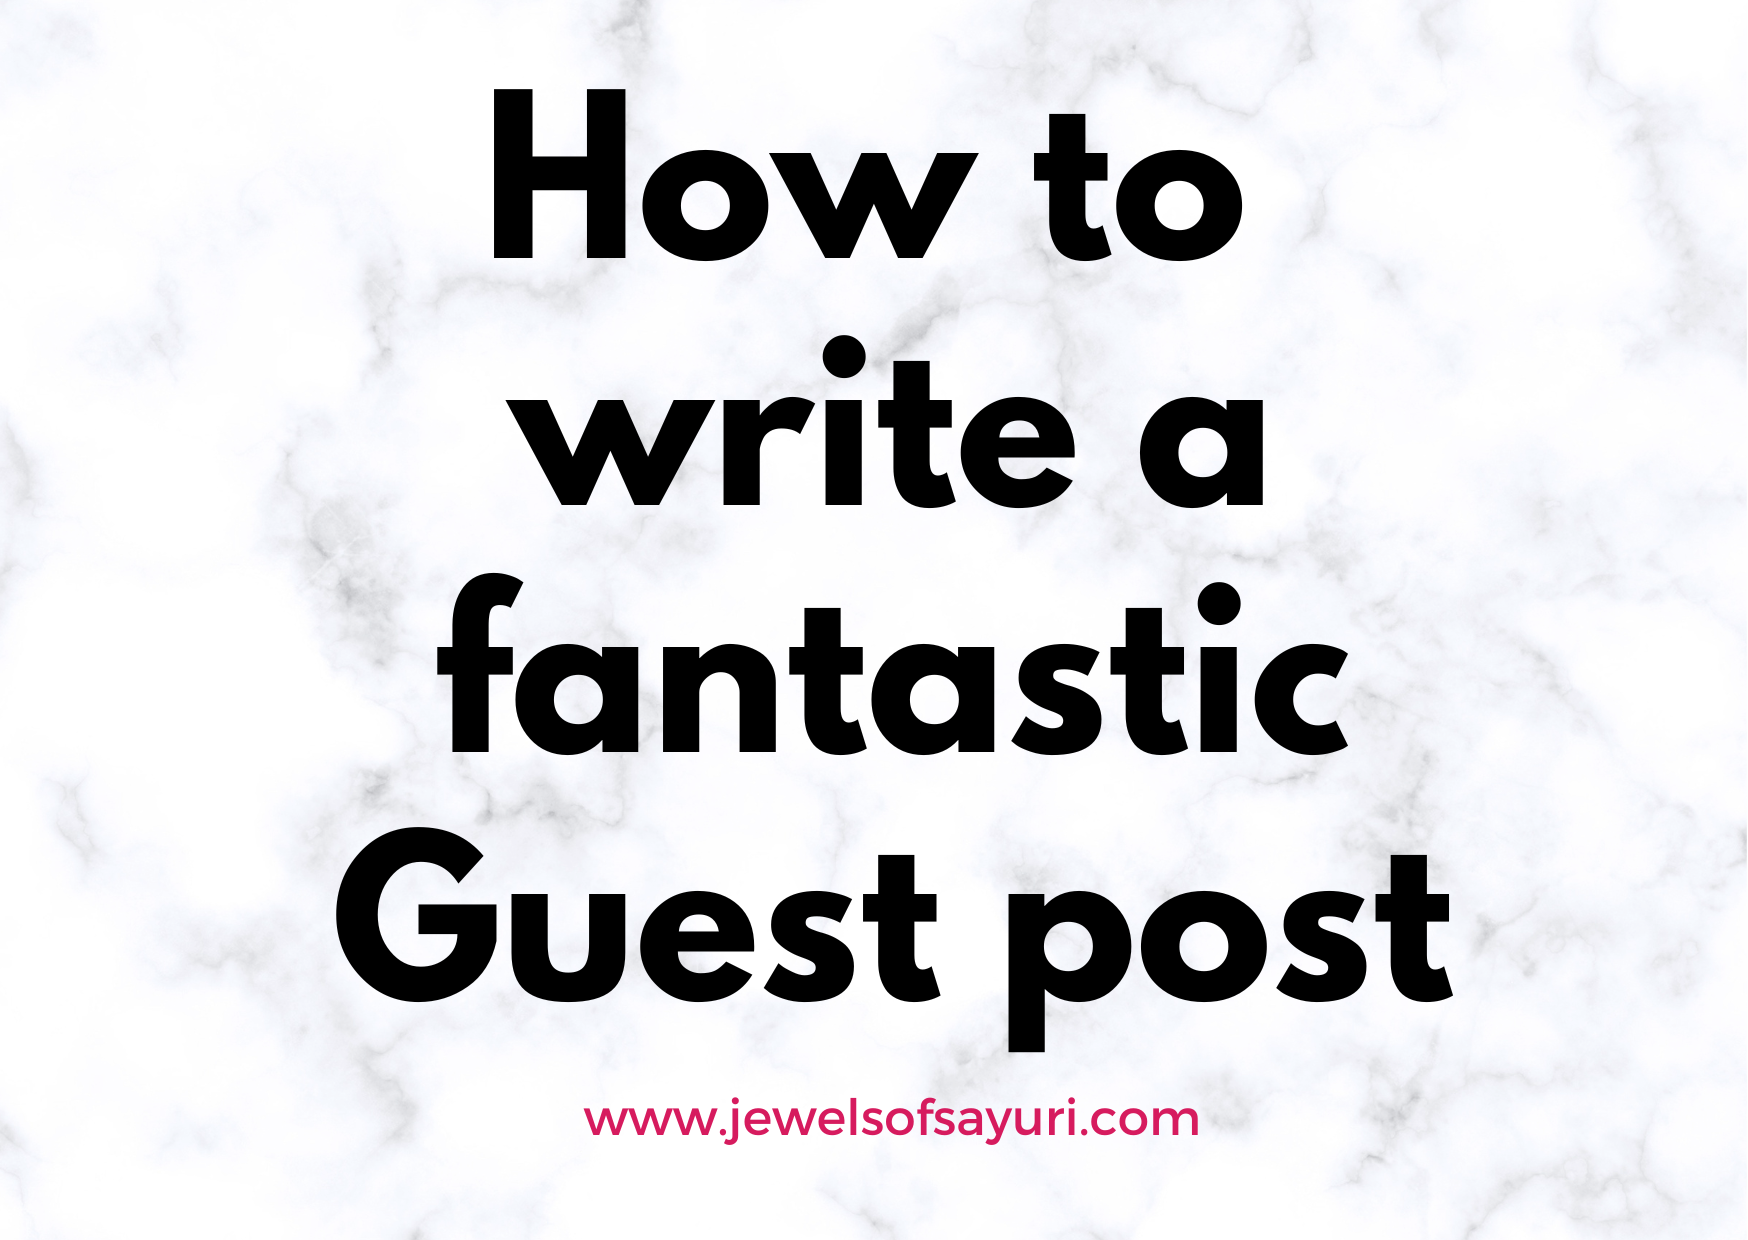 How to write a fantastic Guest post